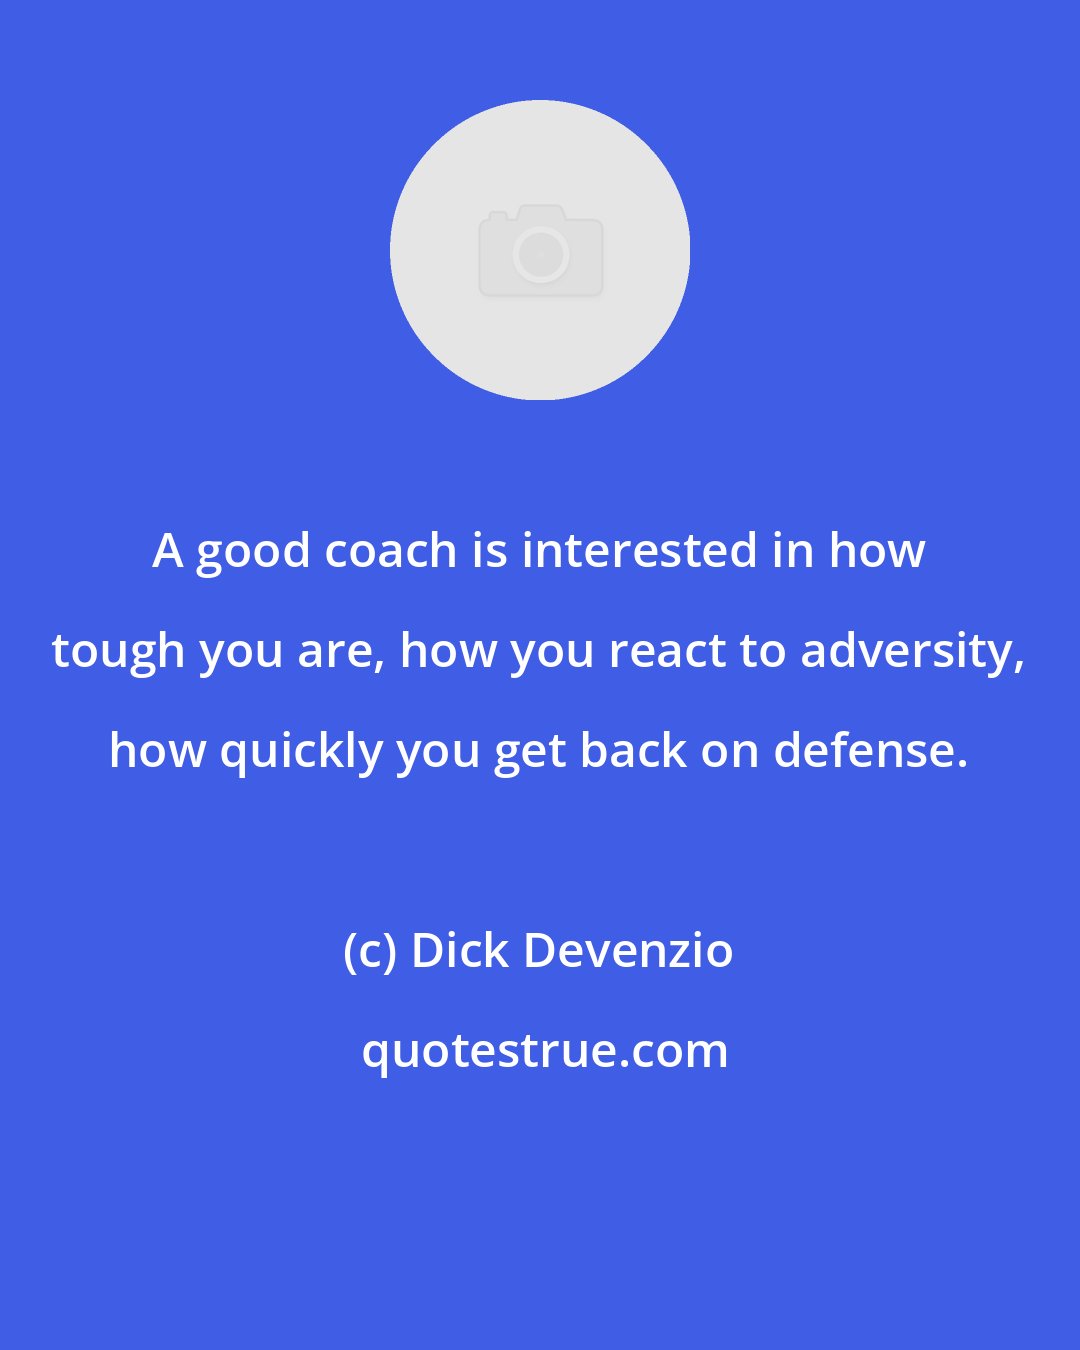 Dick Devenzio: A good coach is interested in how tough you are, how you react to adversity, how quickly you get back on defense.